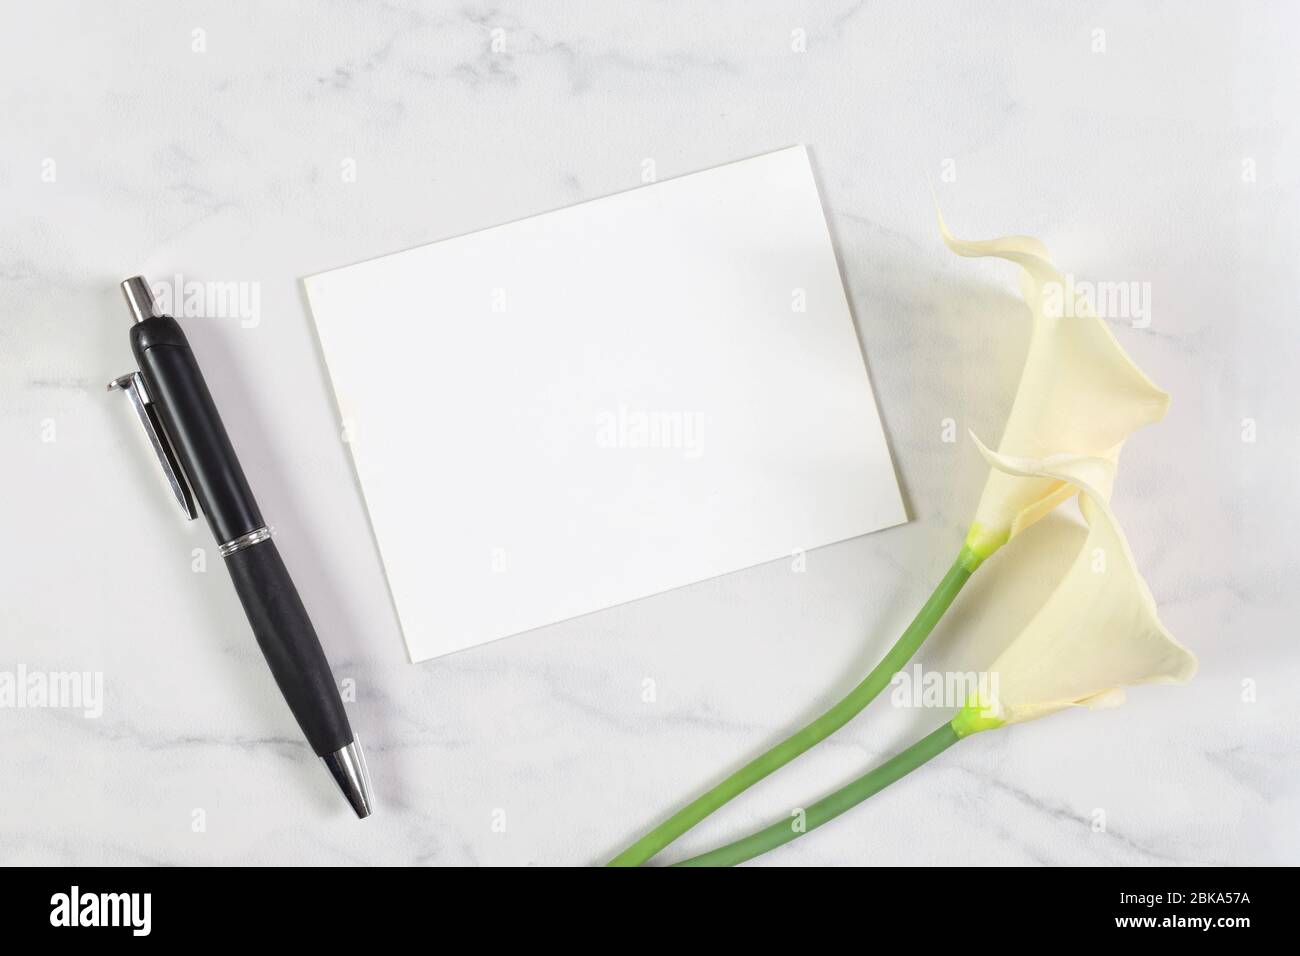 A white card rests atop a white marble background. Calla lilies and a fancy pen surrounded the blank card. Stock Photo